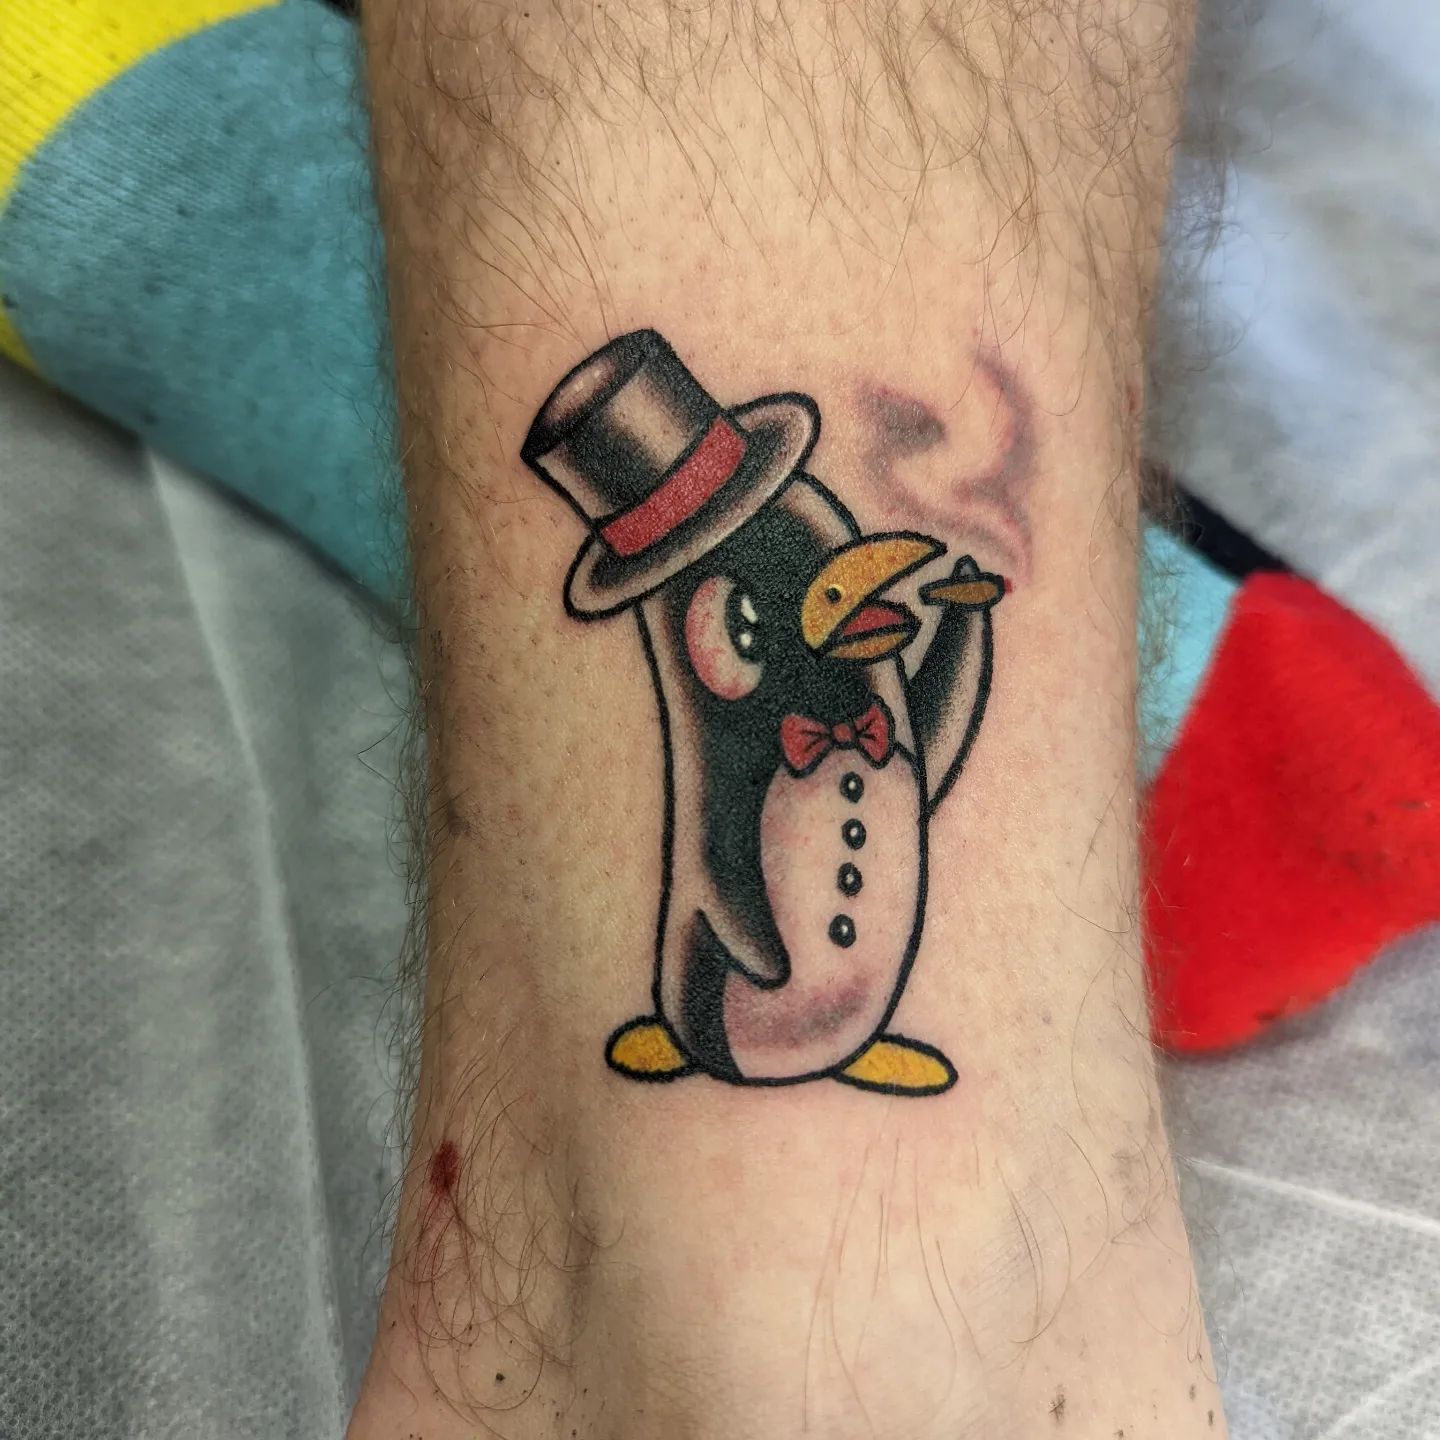 Smoking is a bad habit but a penguin with a cigar on his hand looks cool. Plus, his hat rocks!